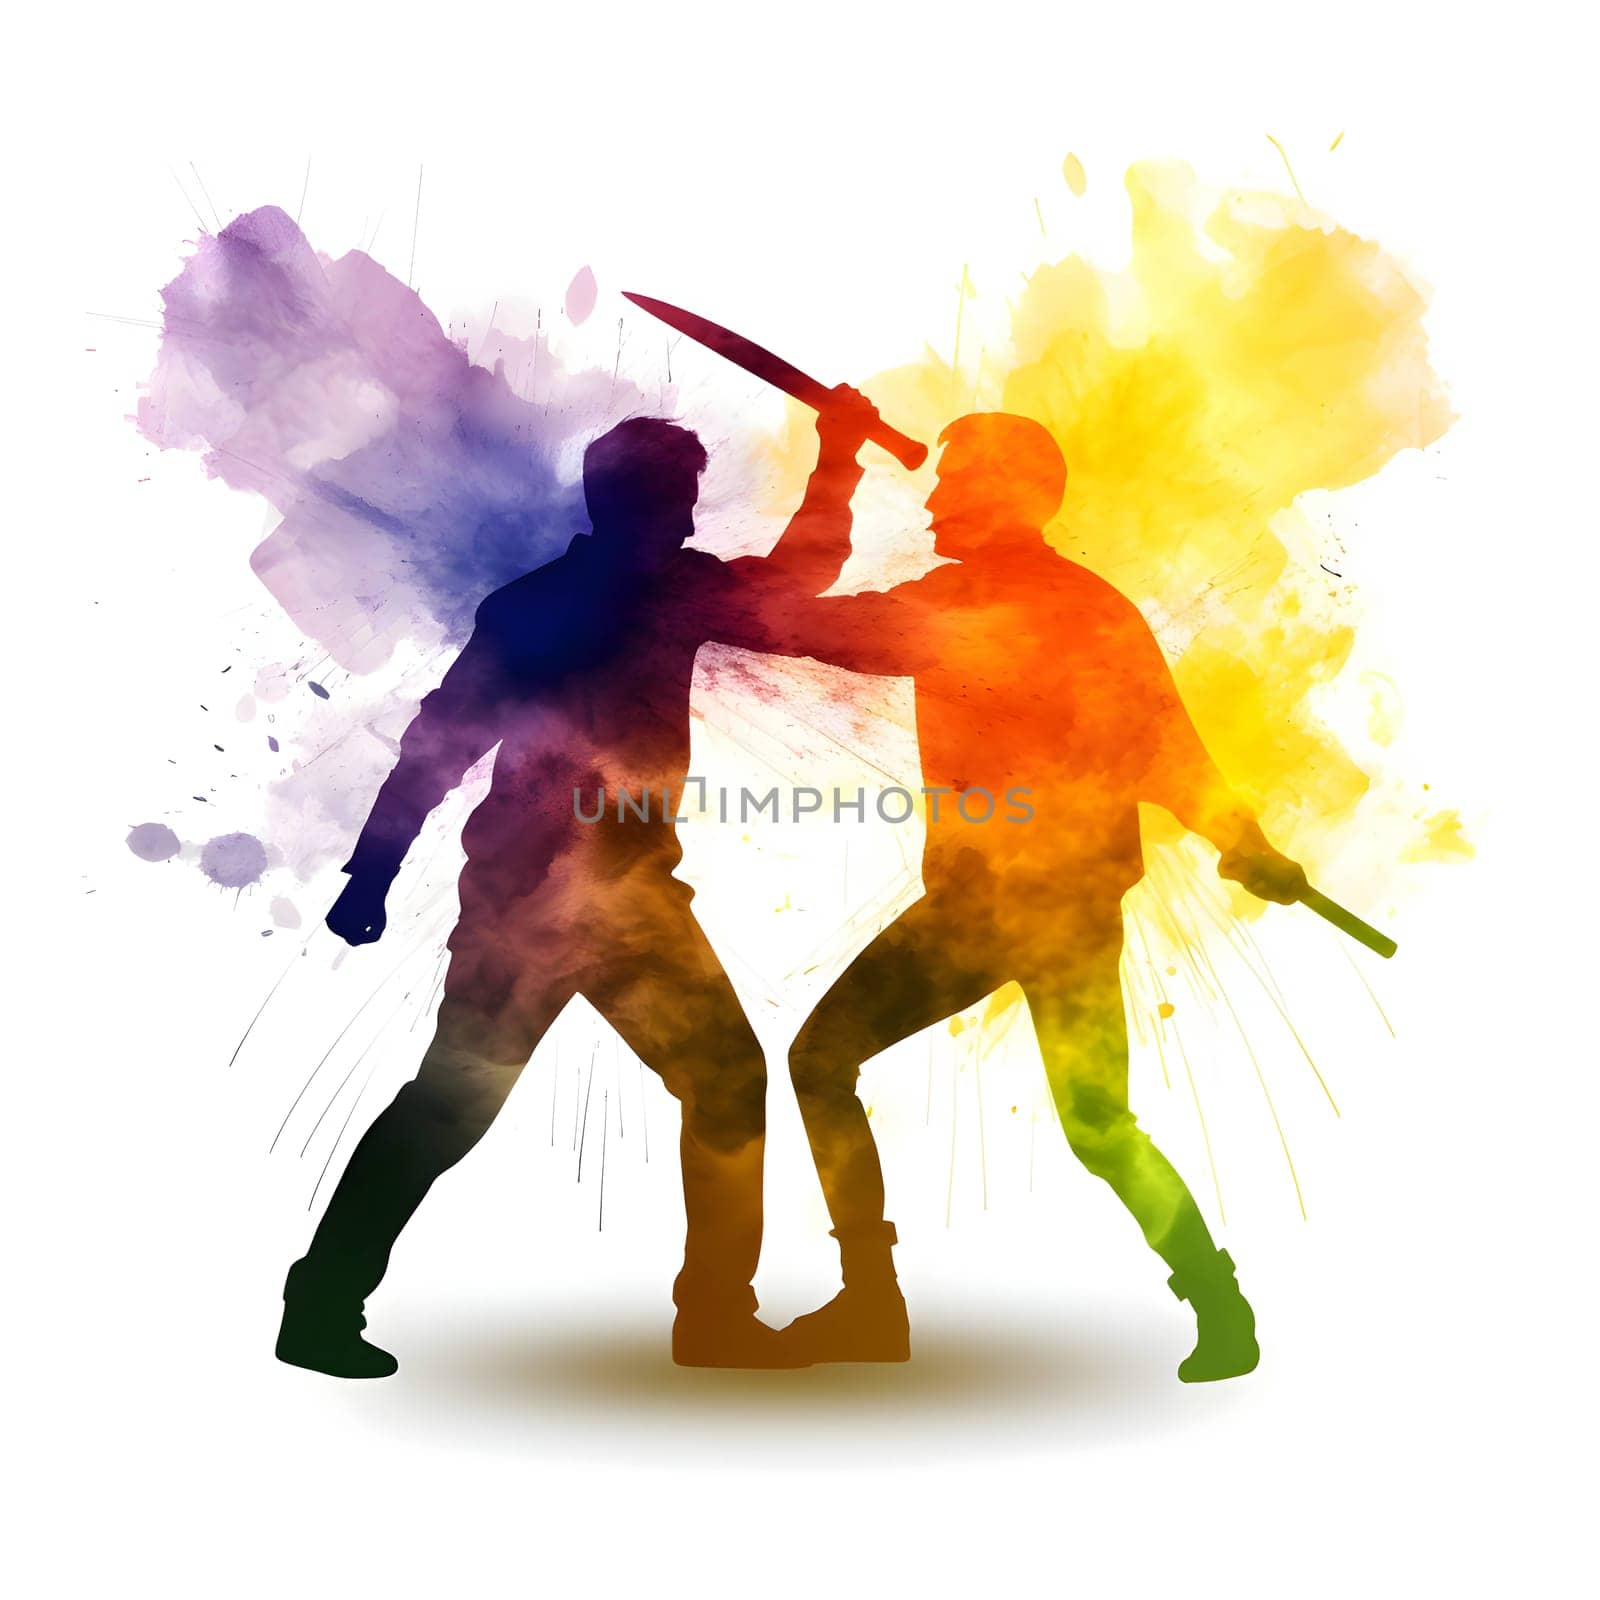 Illustration of two men engaged in a colorful fight, representing strength, diversity, and unity, against a white background.